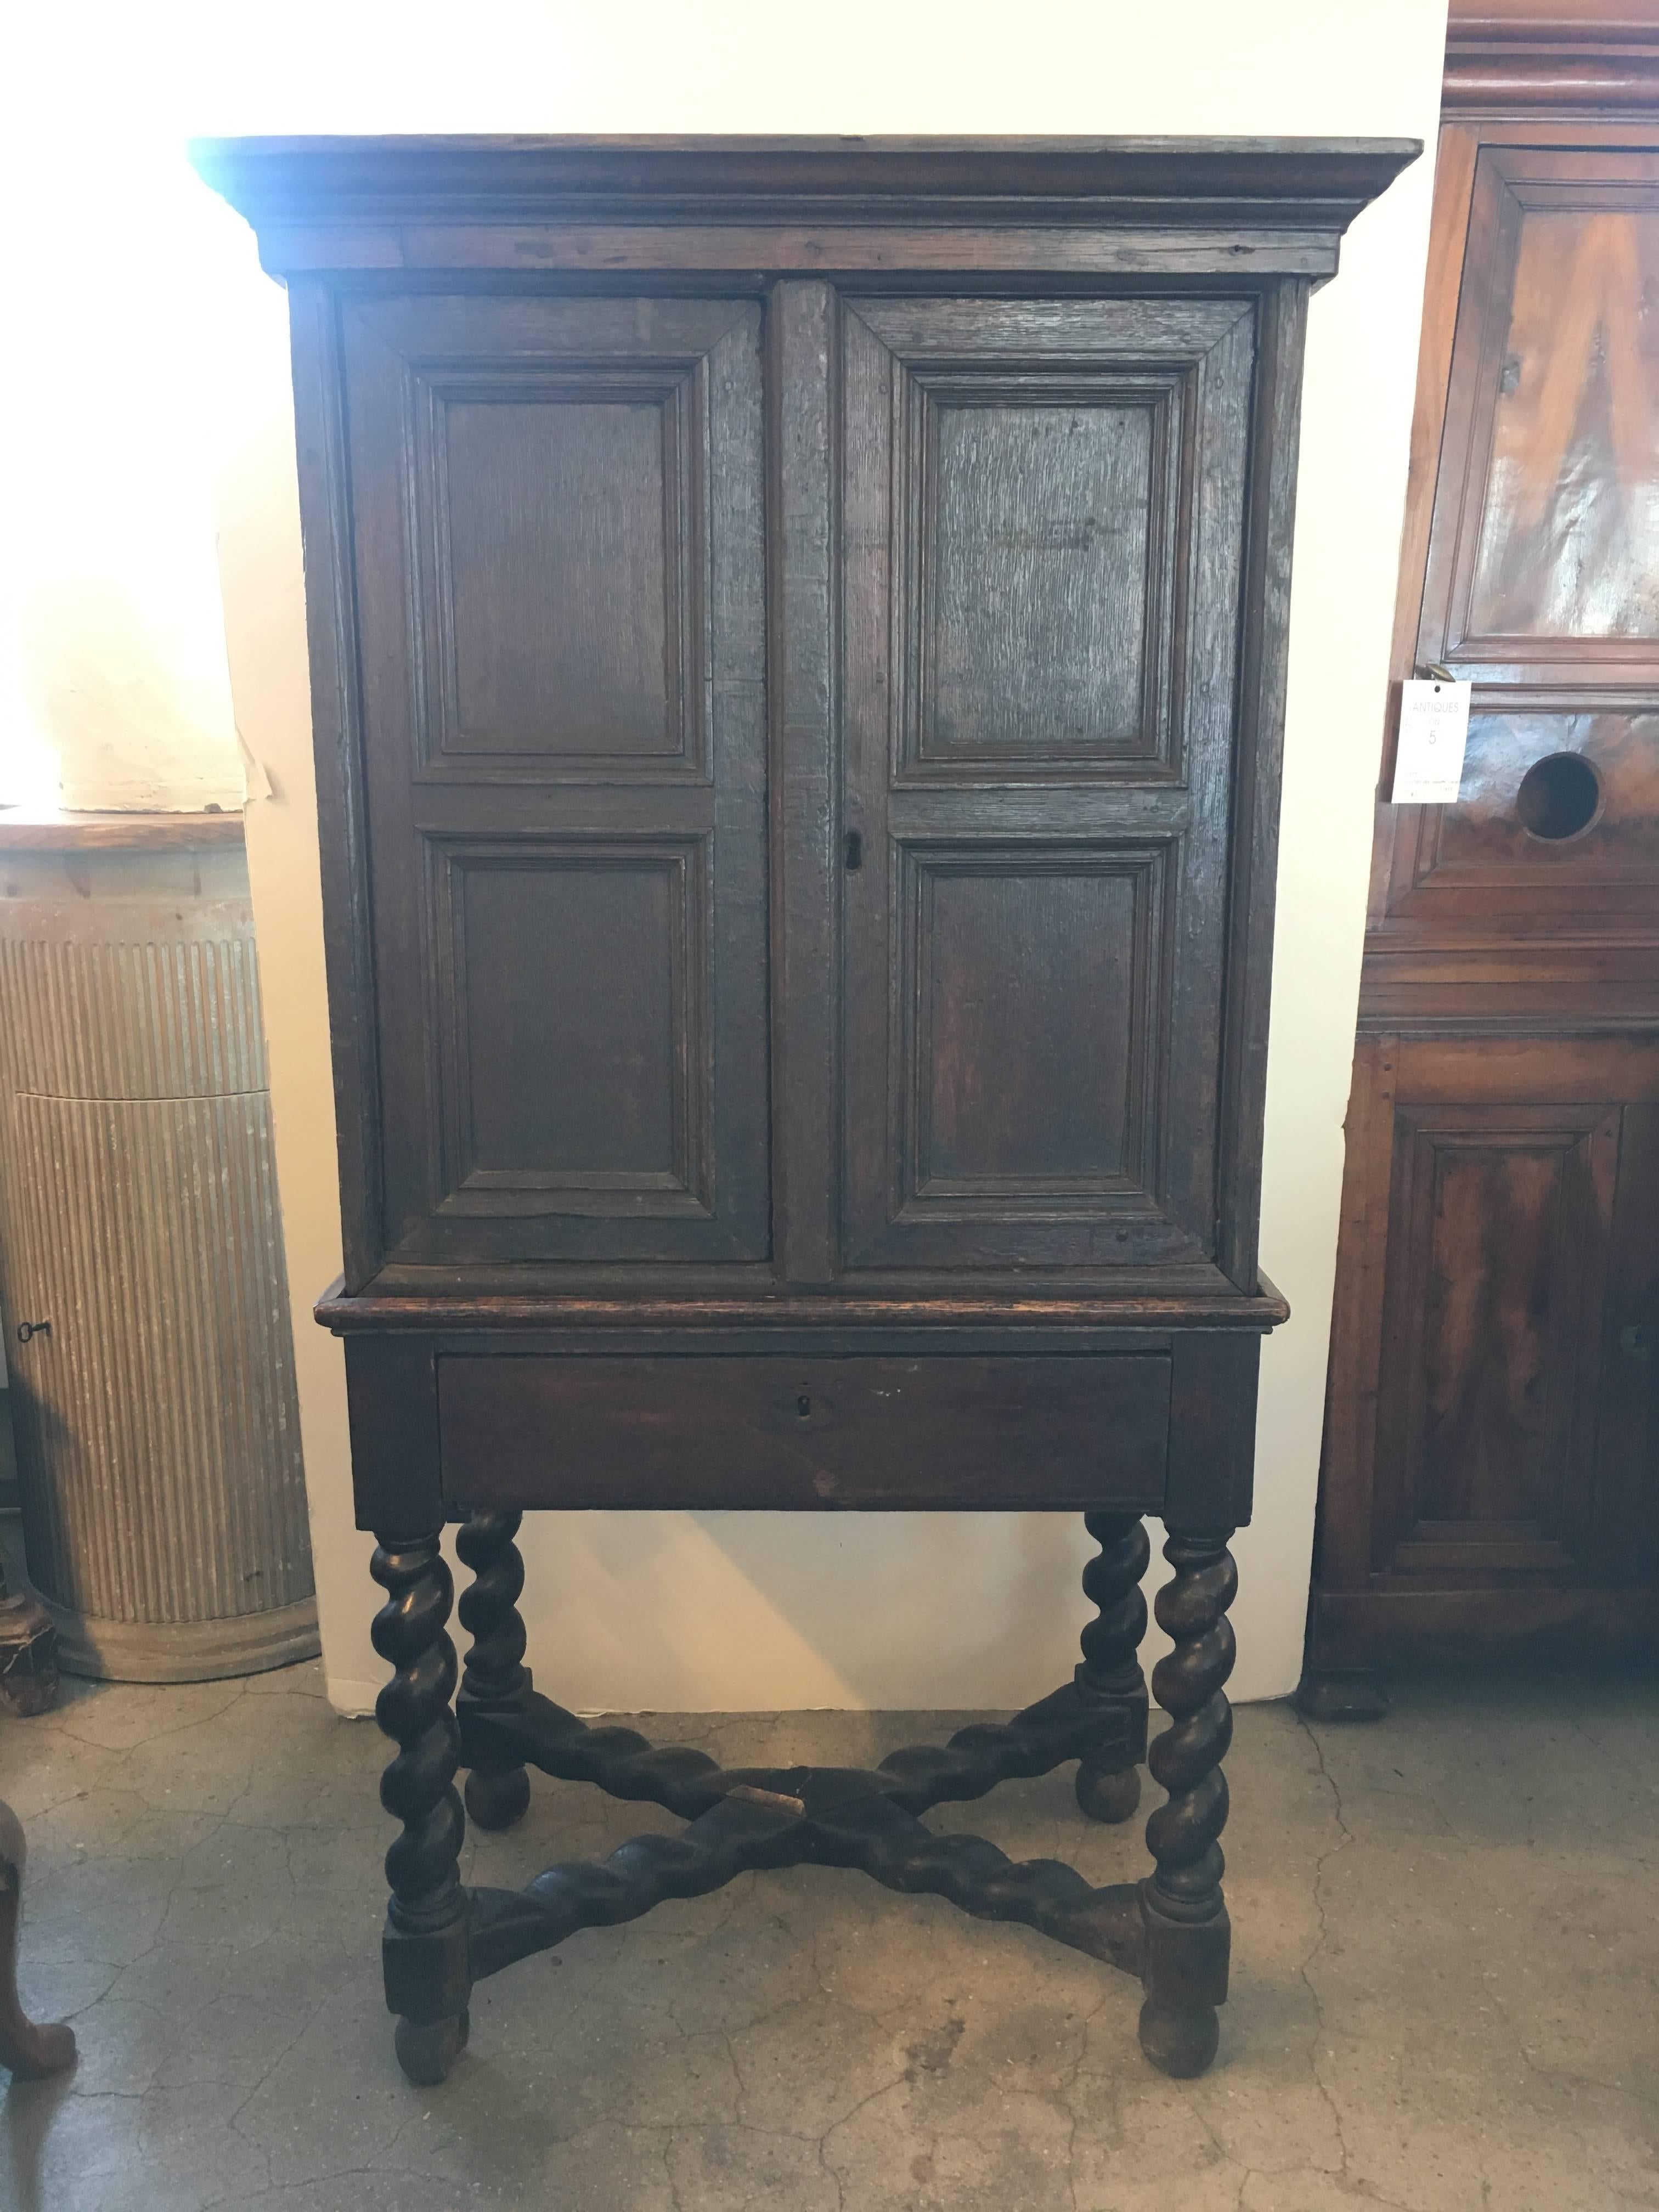 18th century English cabinet on stand.